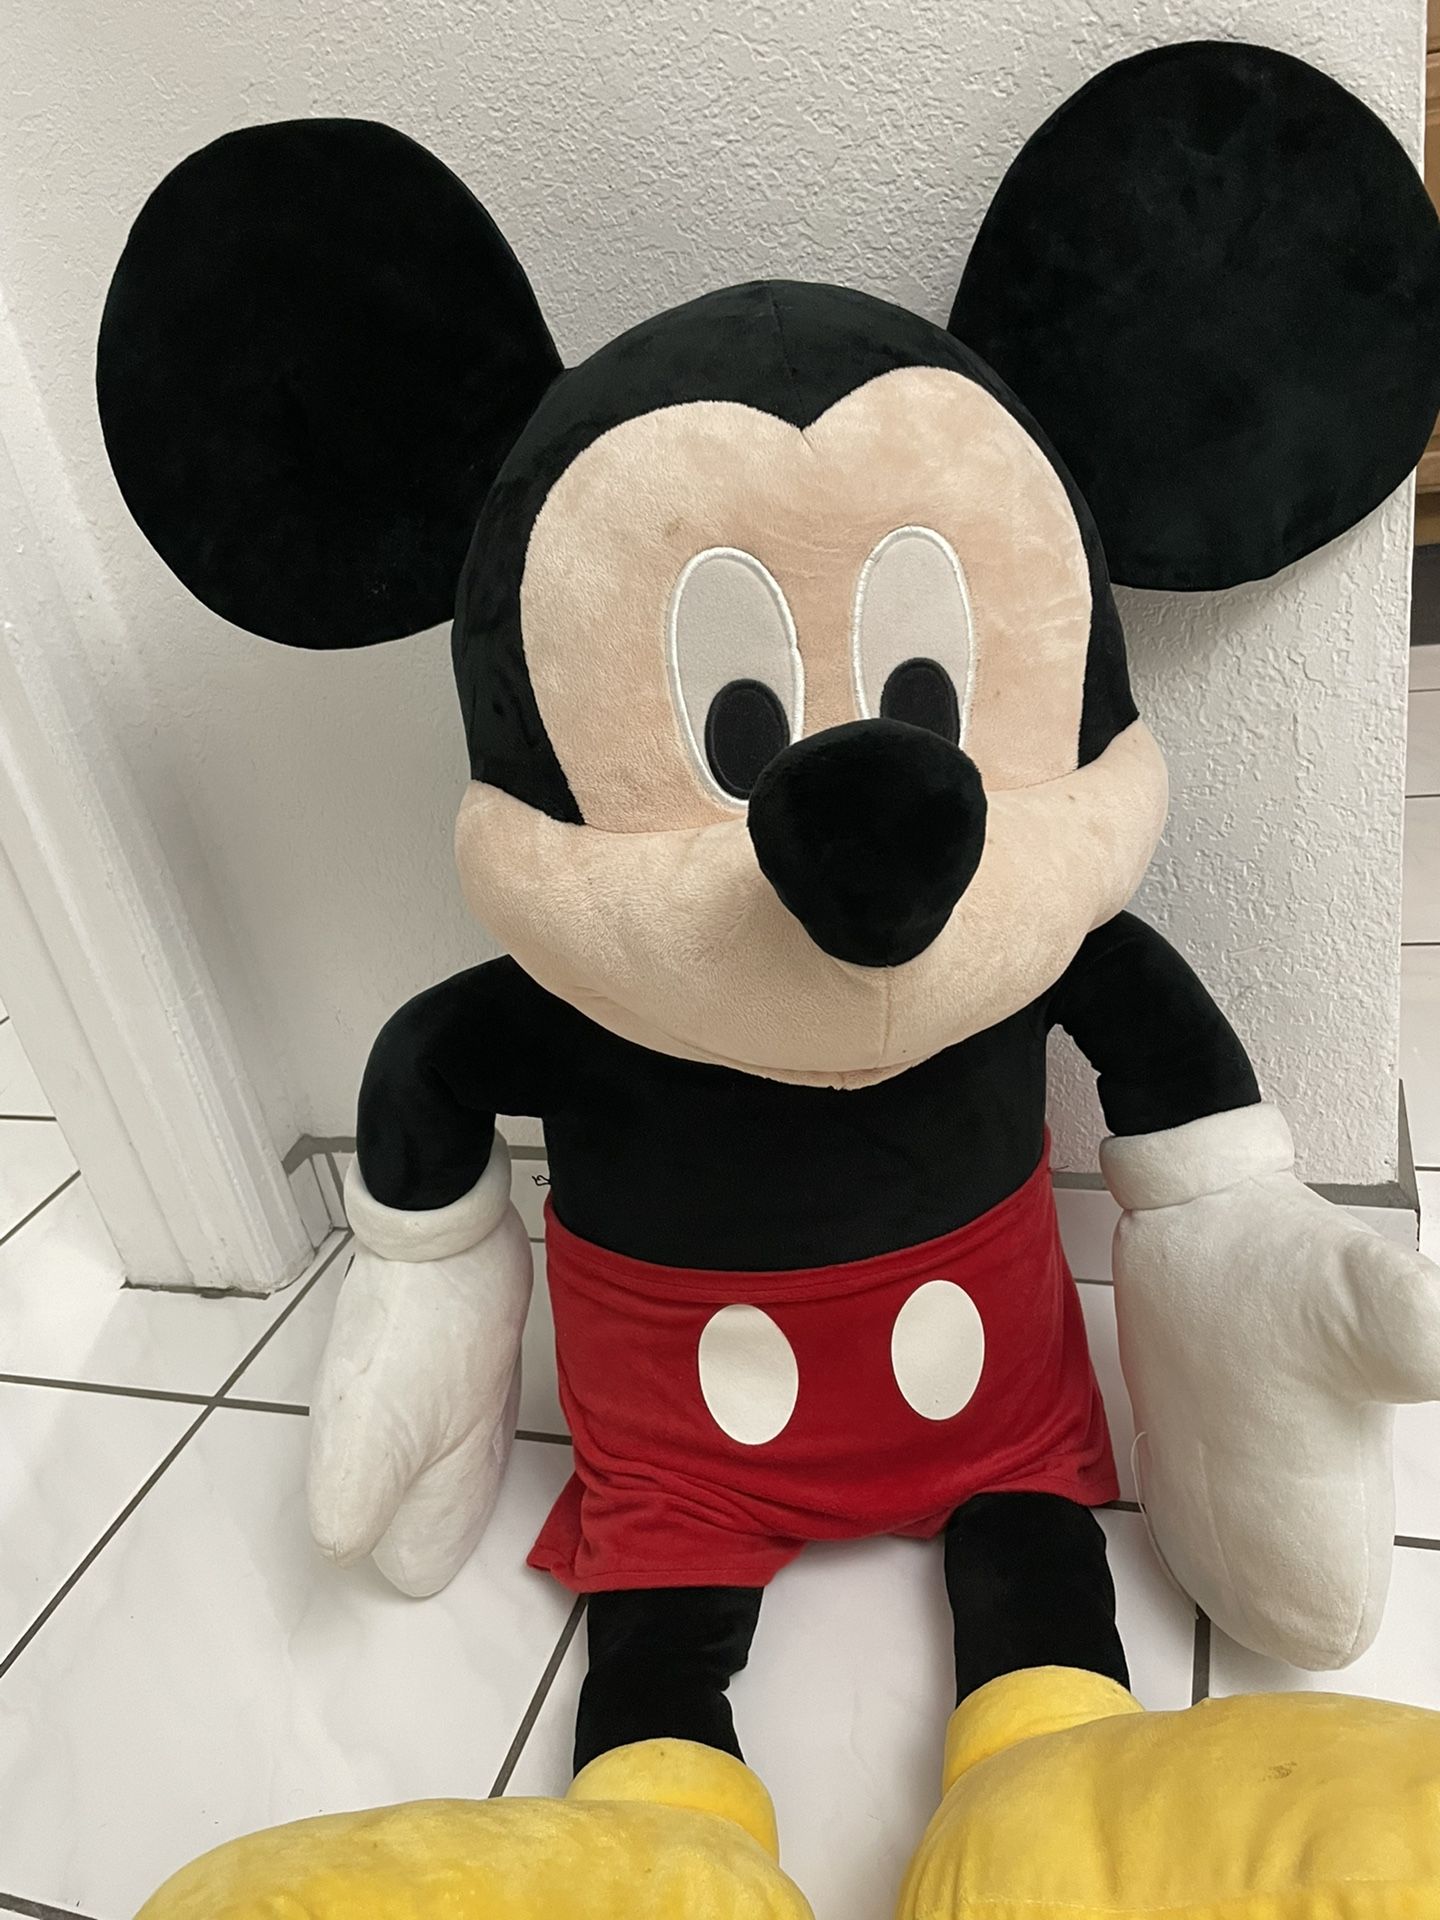 Huge Mickey Mouse Plush Toy